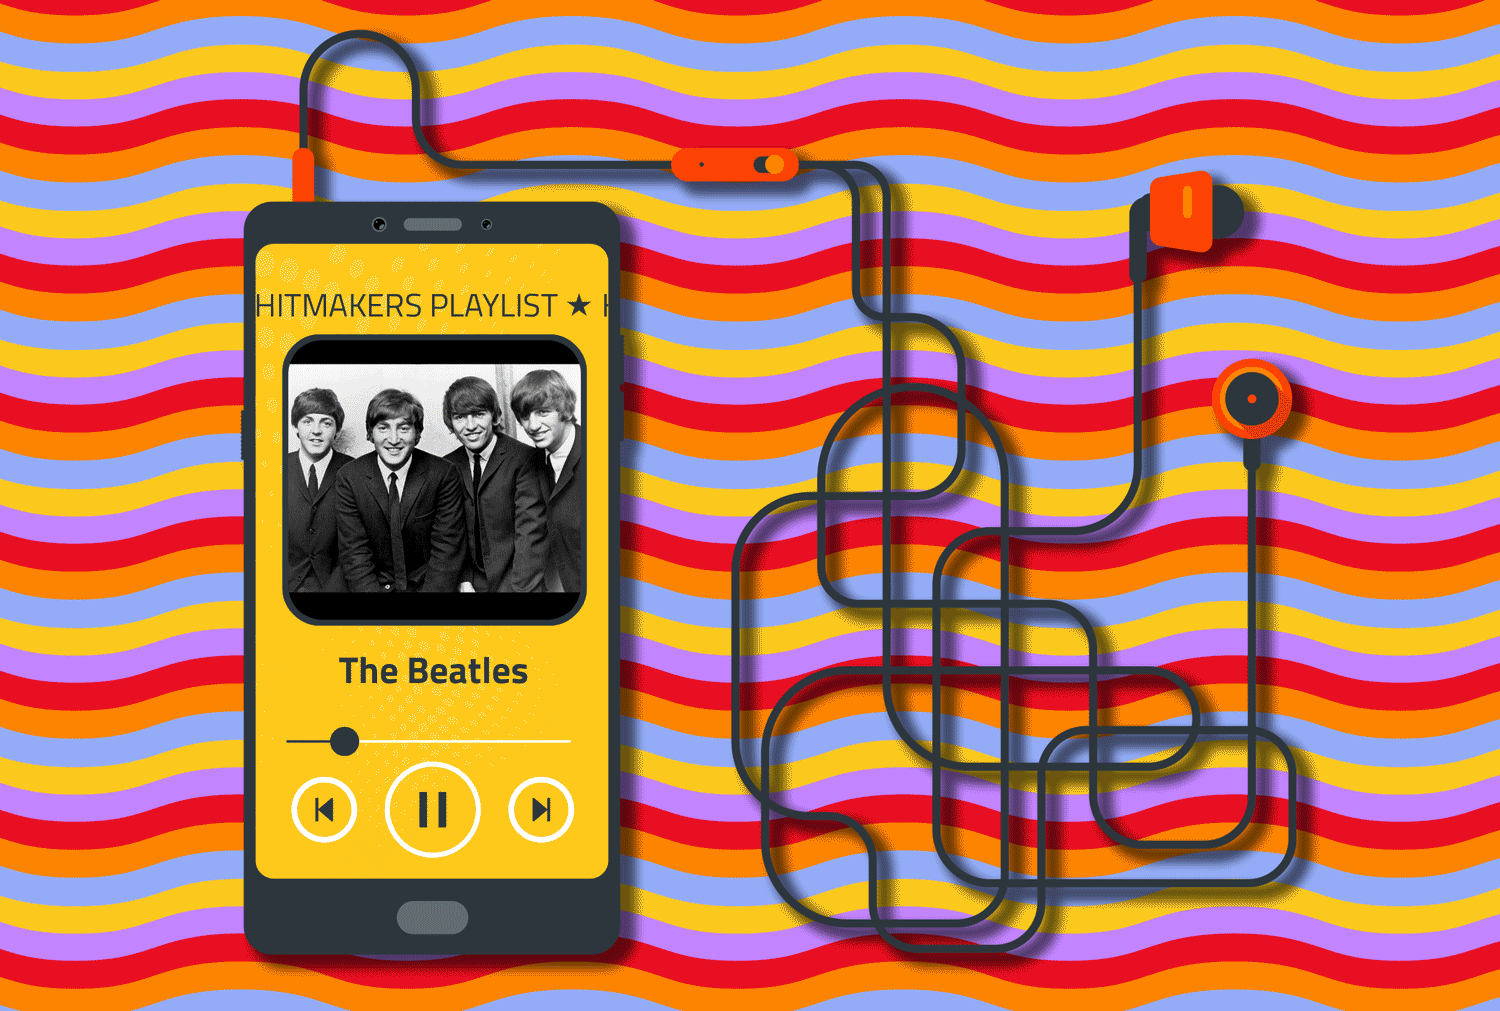 A smartphone cycling through a playlist of the music artists with the most number one hits